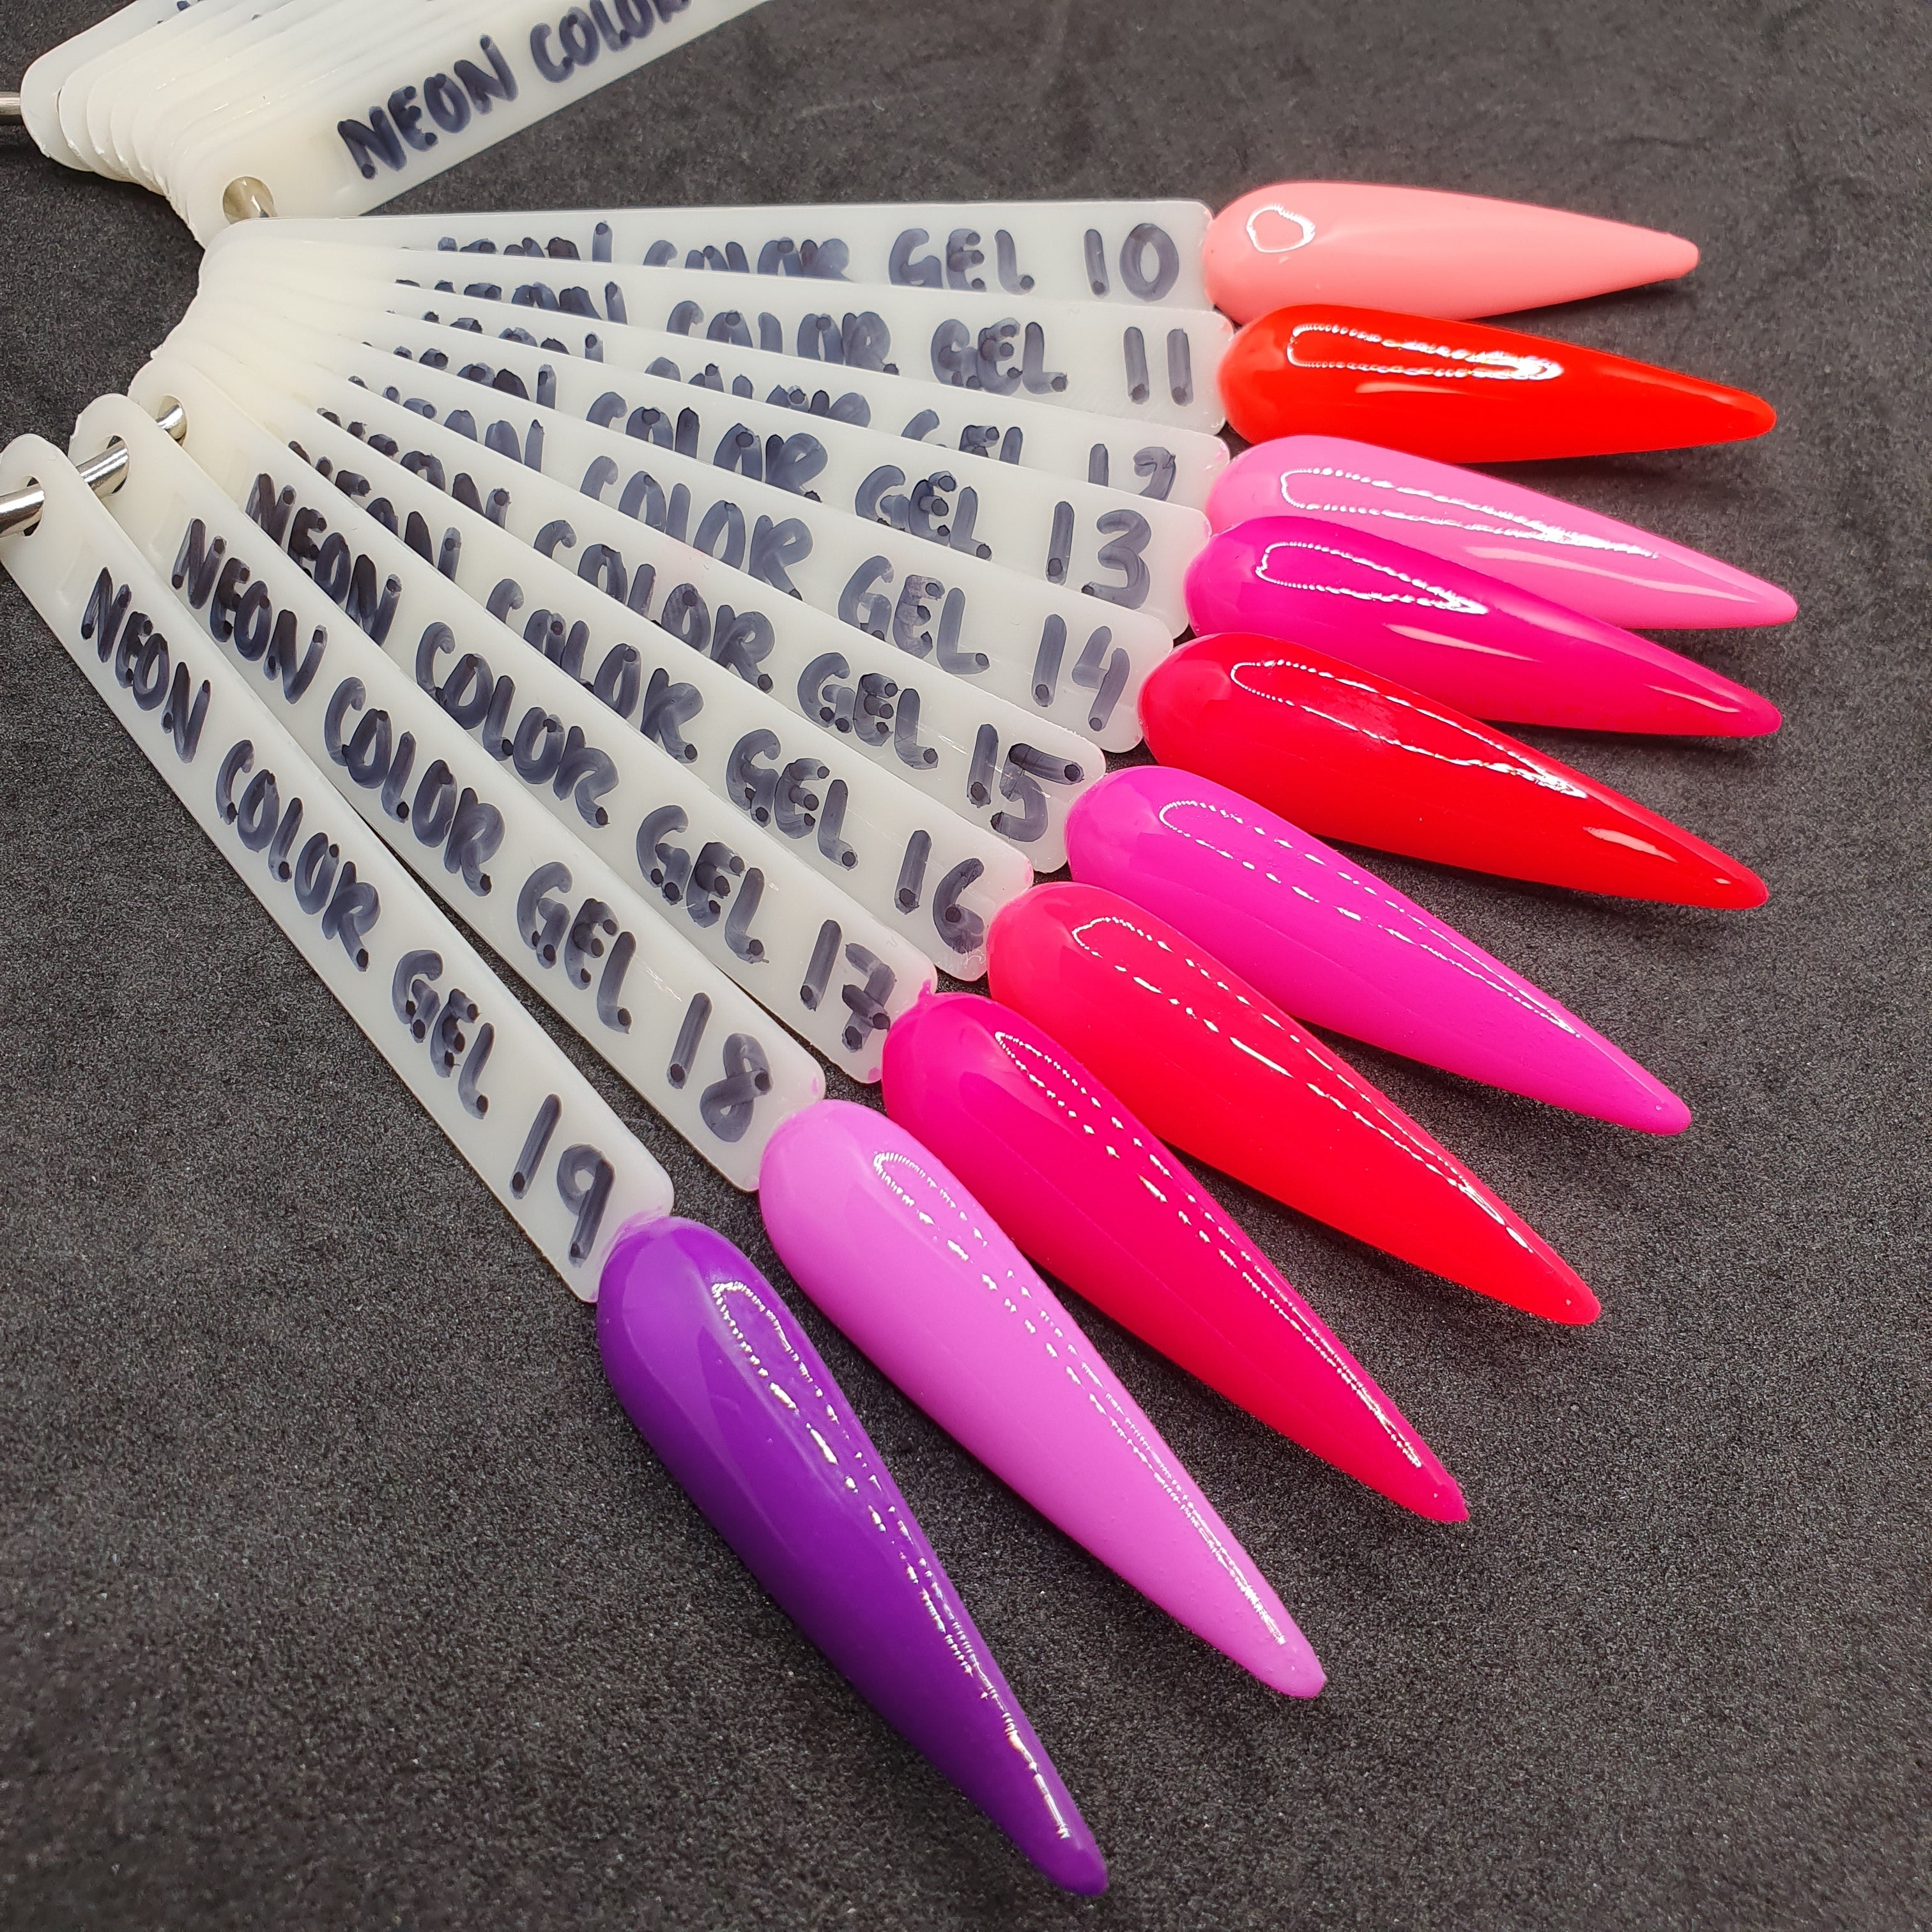 NEW - GND NEON GEL COLOR - 14